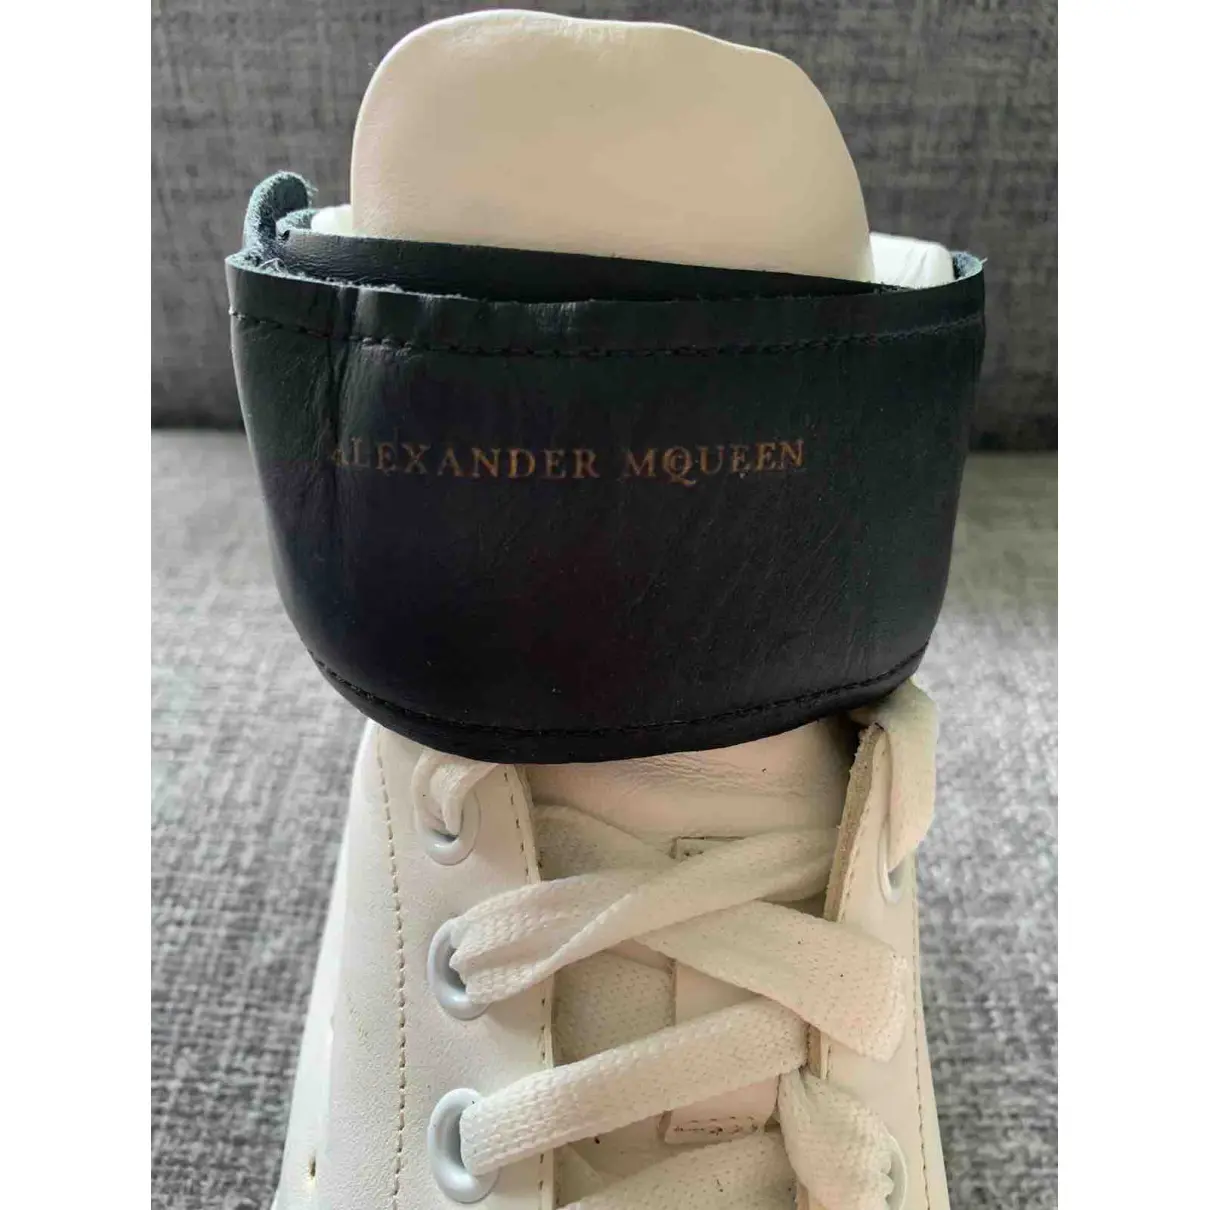 Oversize leather high trainers Alexander McQueen